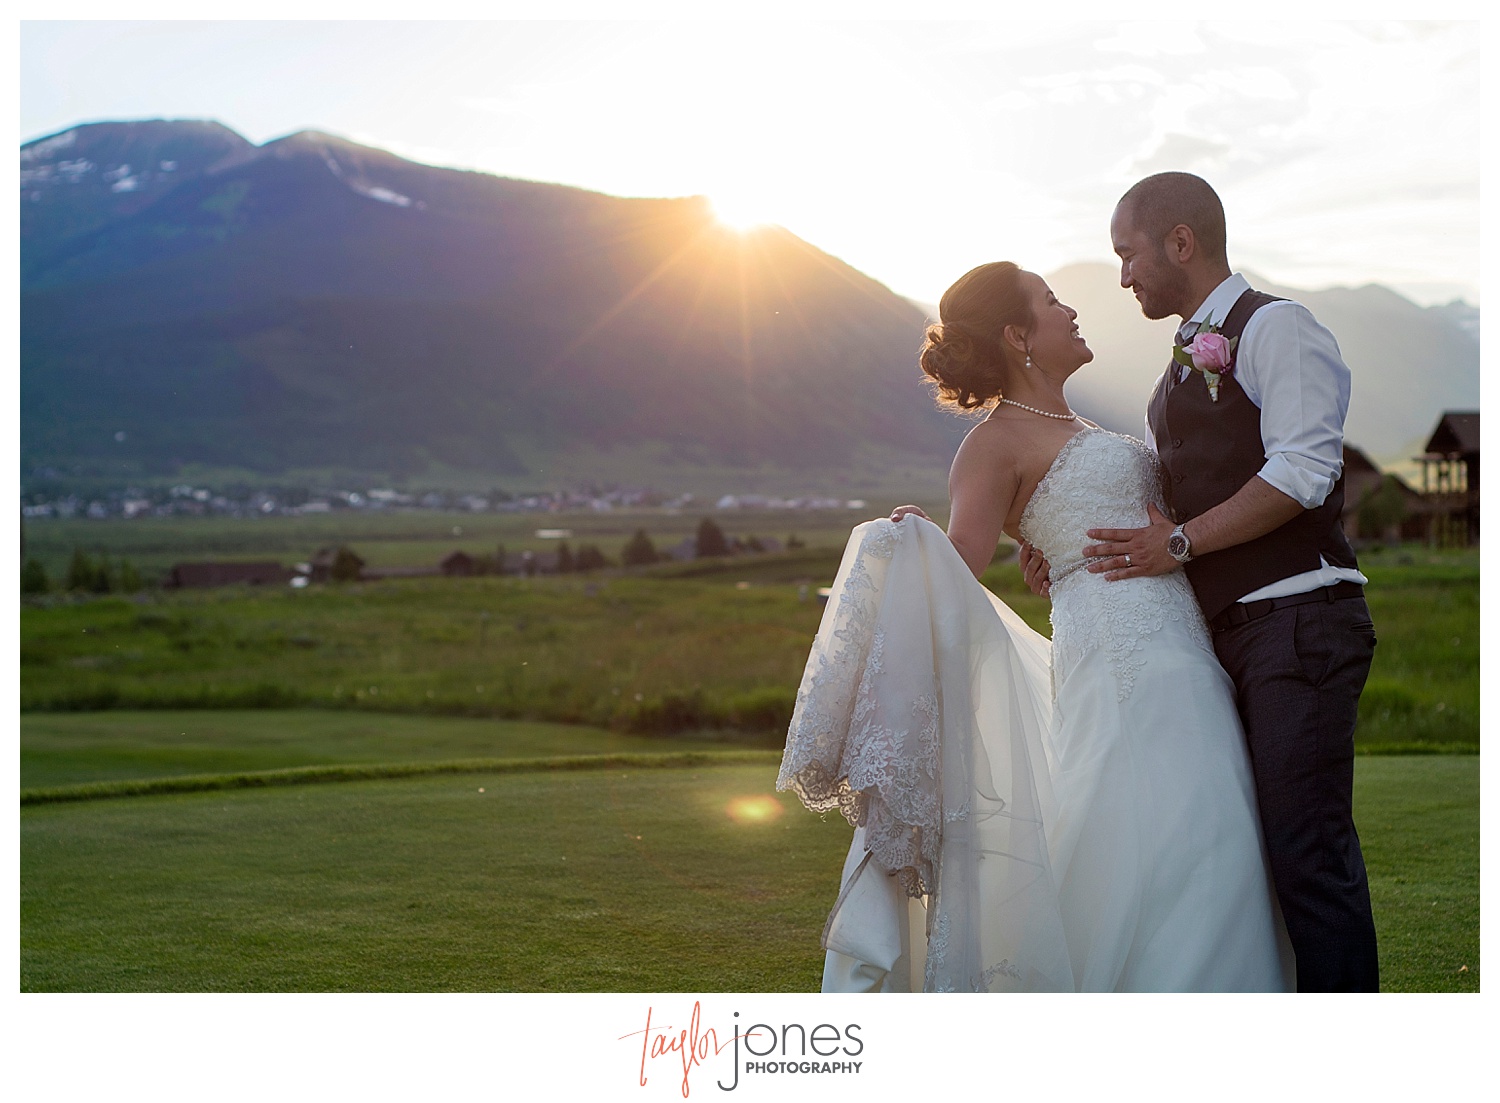 Wedding reception at The Club at Crested Butte couple portraits bride and groom